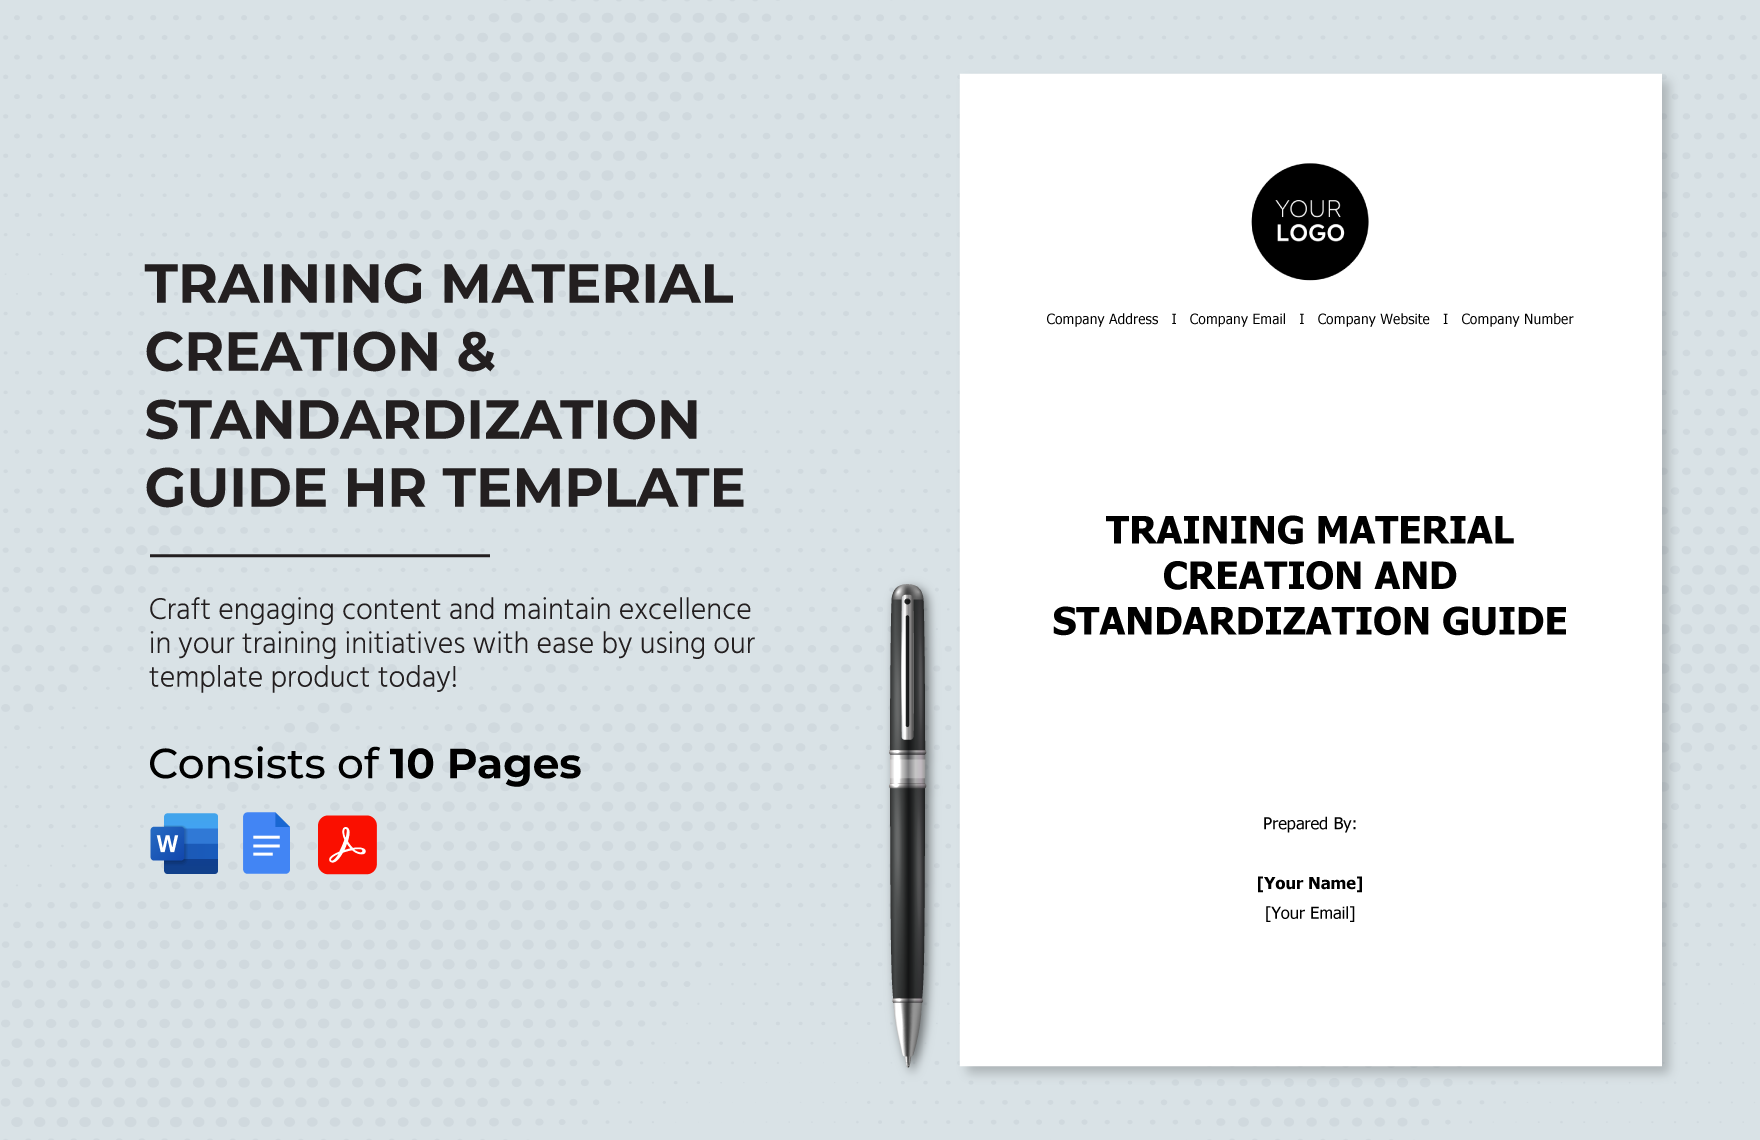 training-material-creation-standardization-guide-hr-template